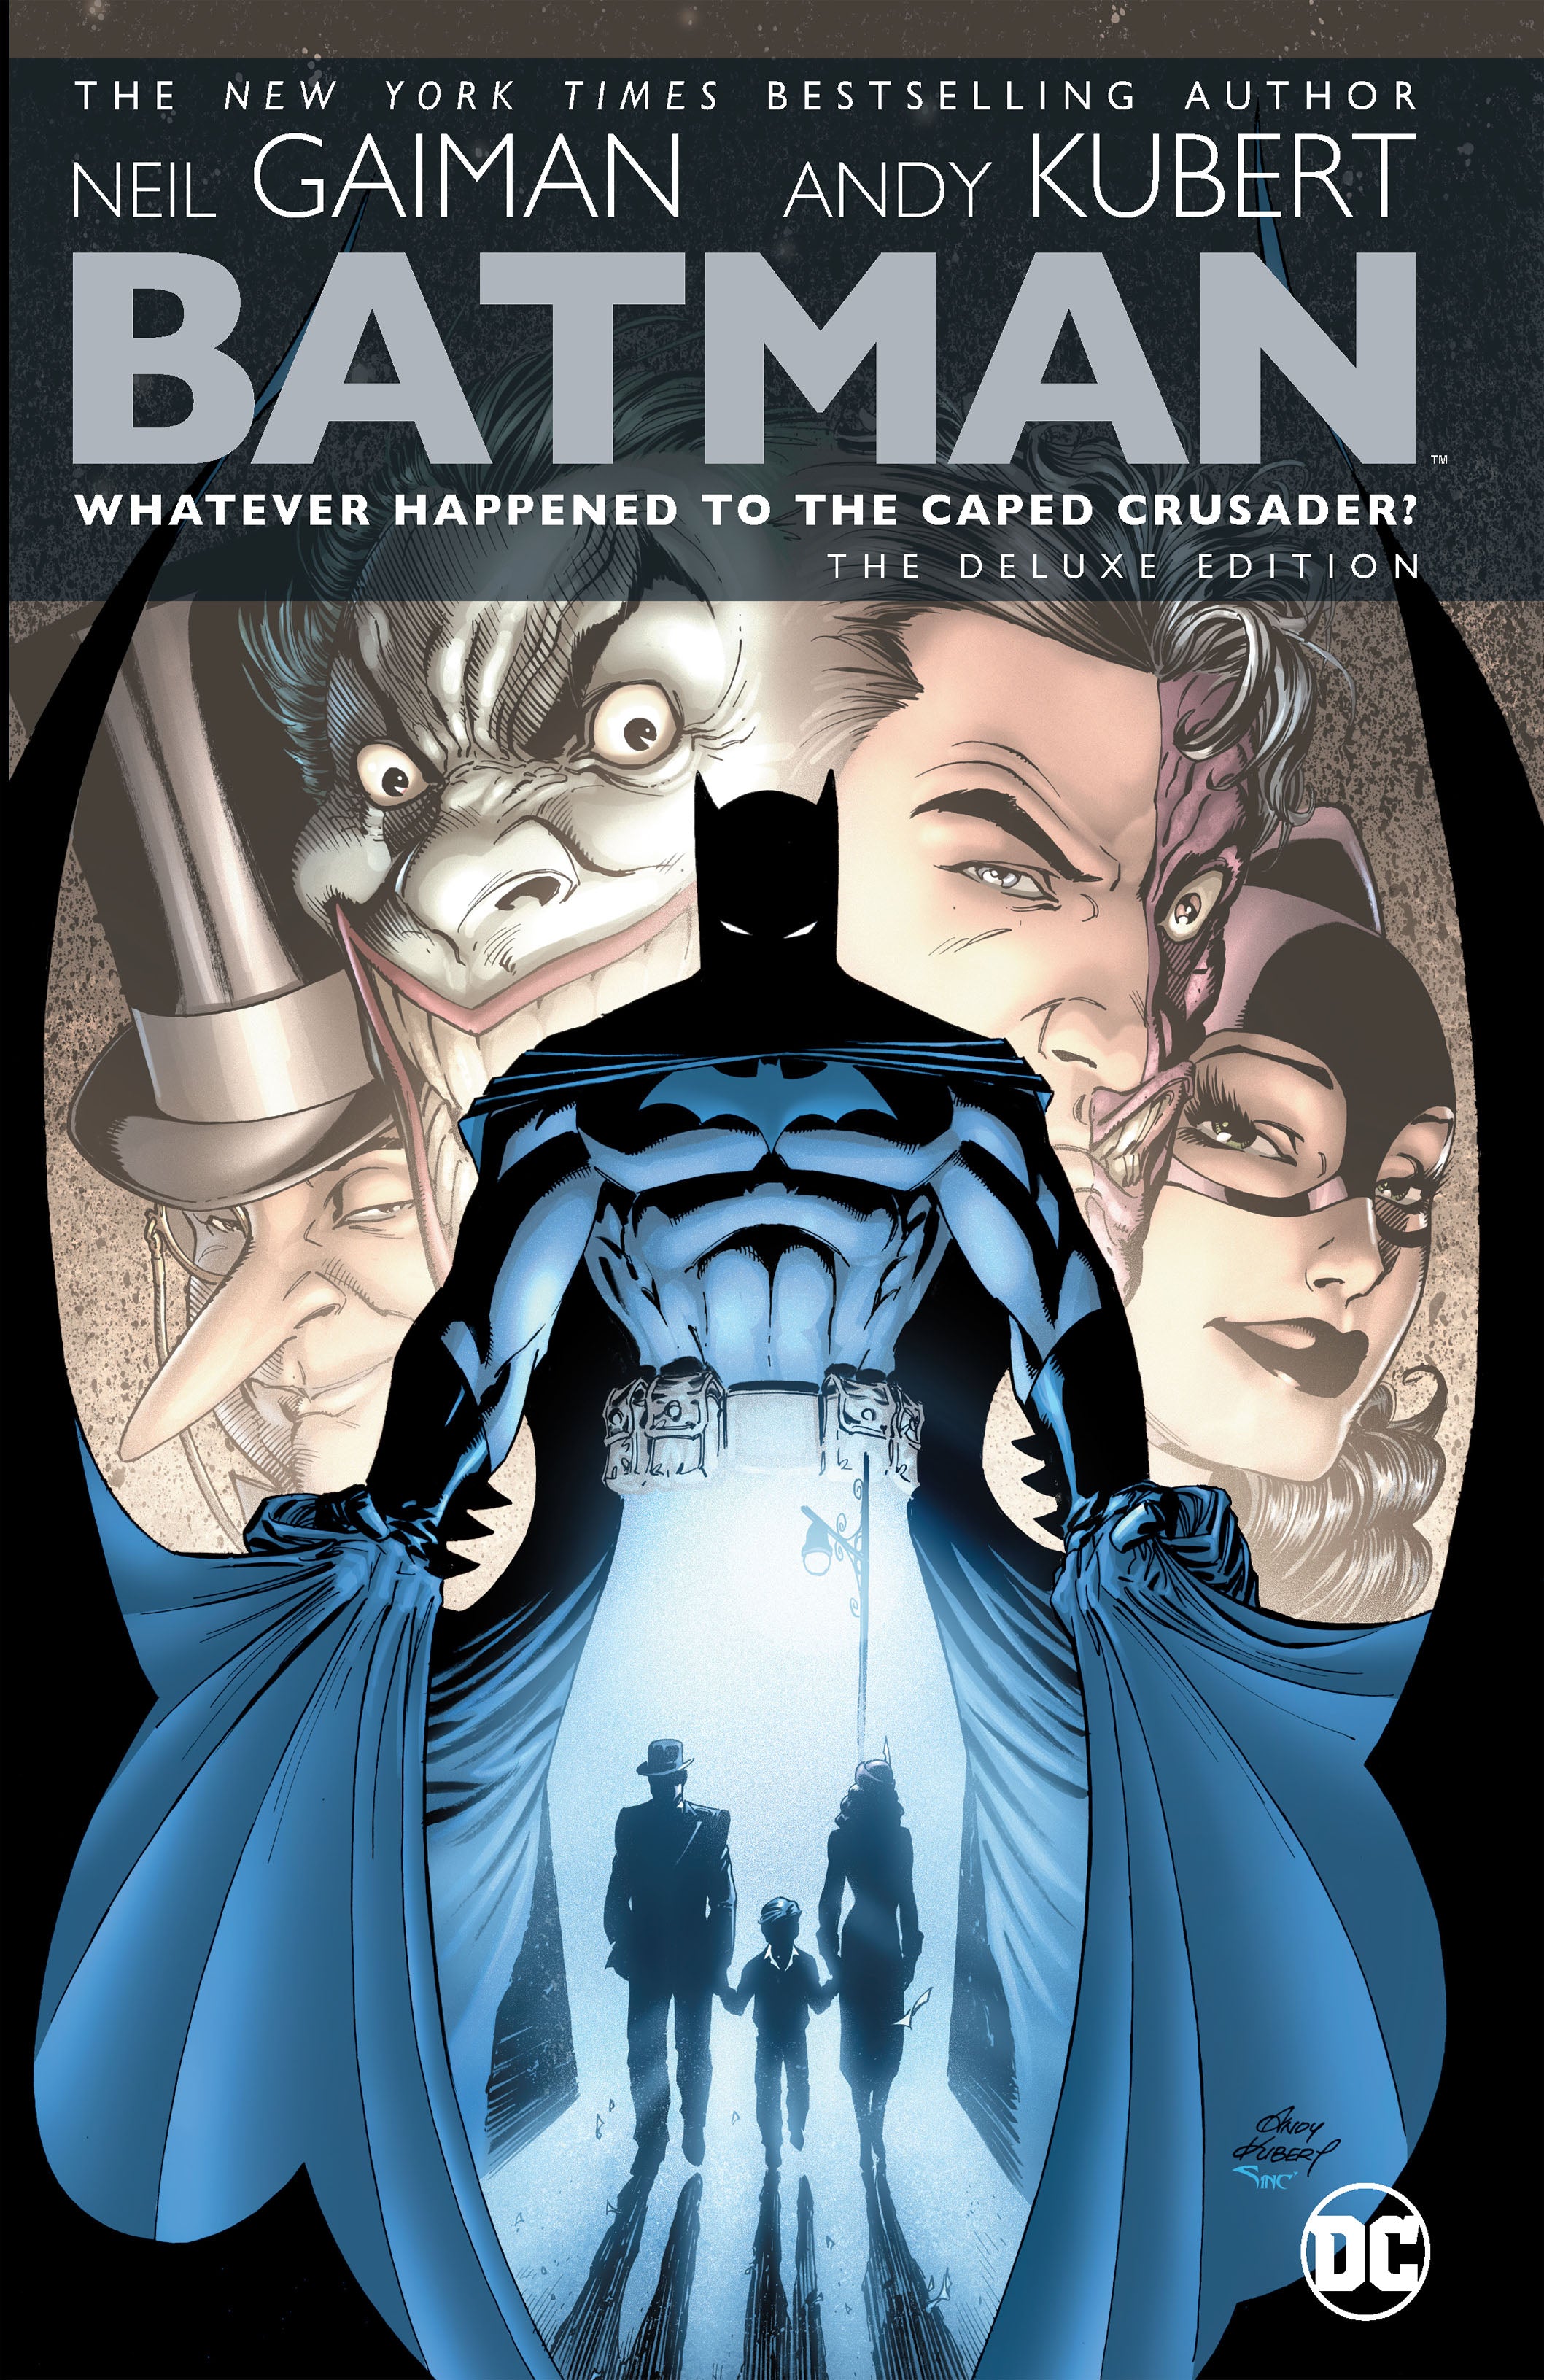 BATMAN WHATEVER HAPPENED TO THE CAPED CRUSADER DELUXE 2020 EDITION HARDCOVER